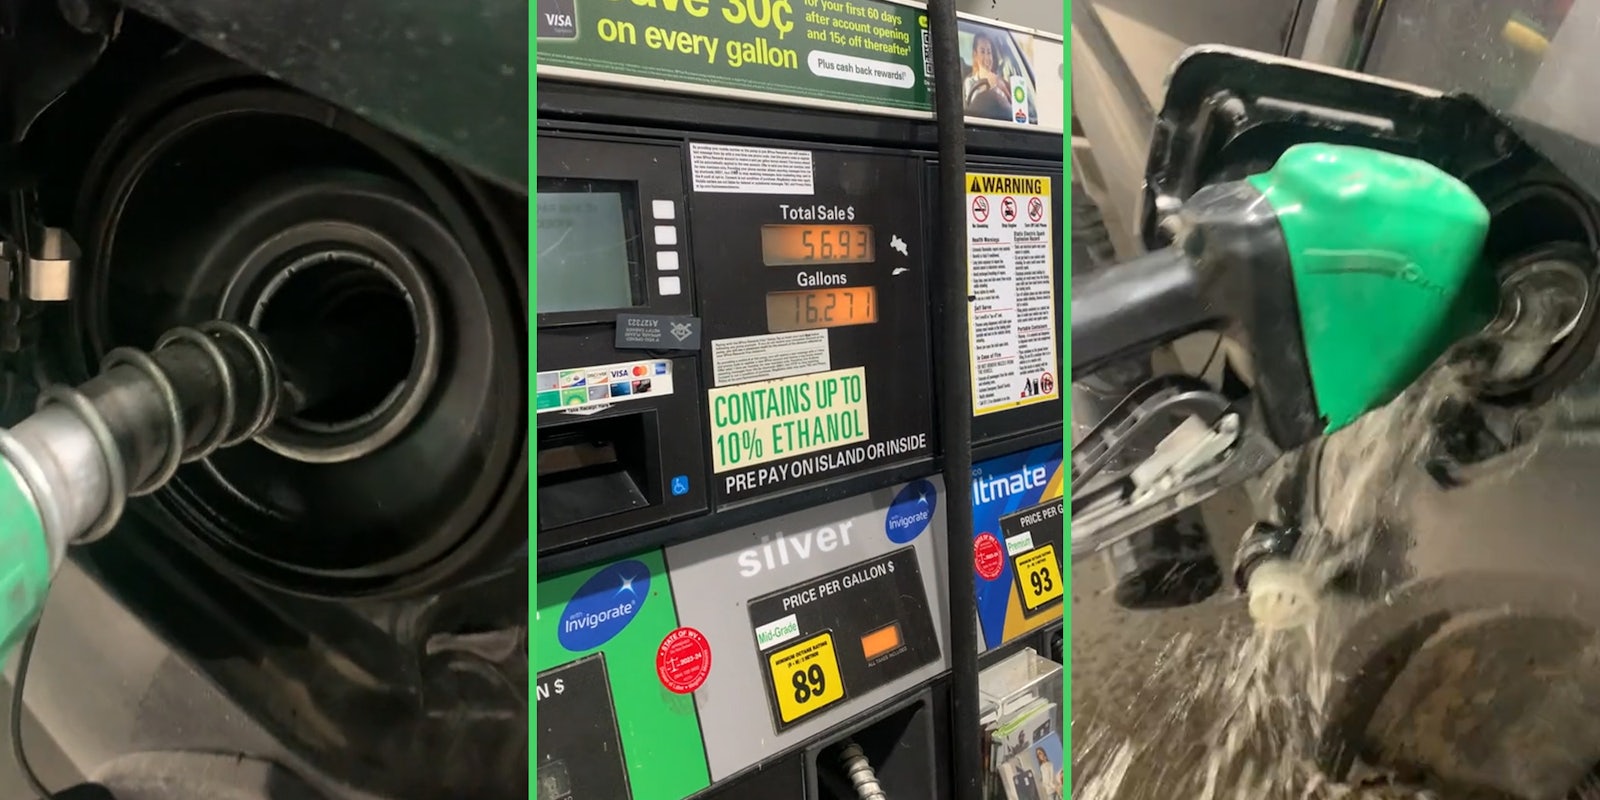 gas station customer was unable to stop nozzle from pumping gas